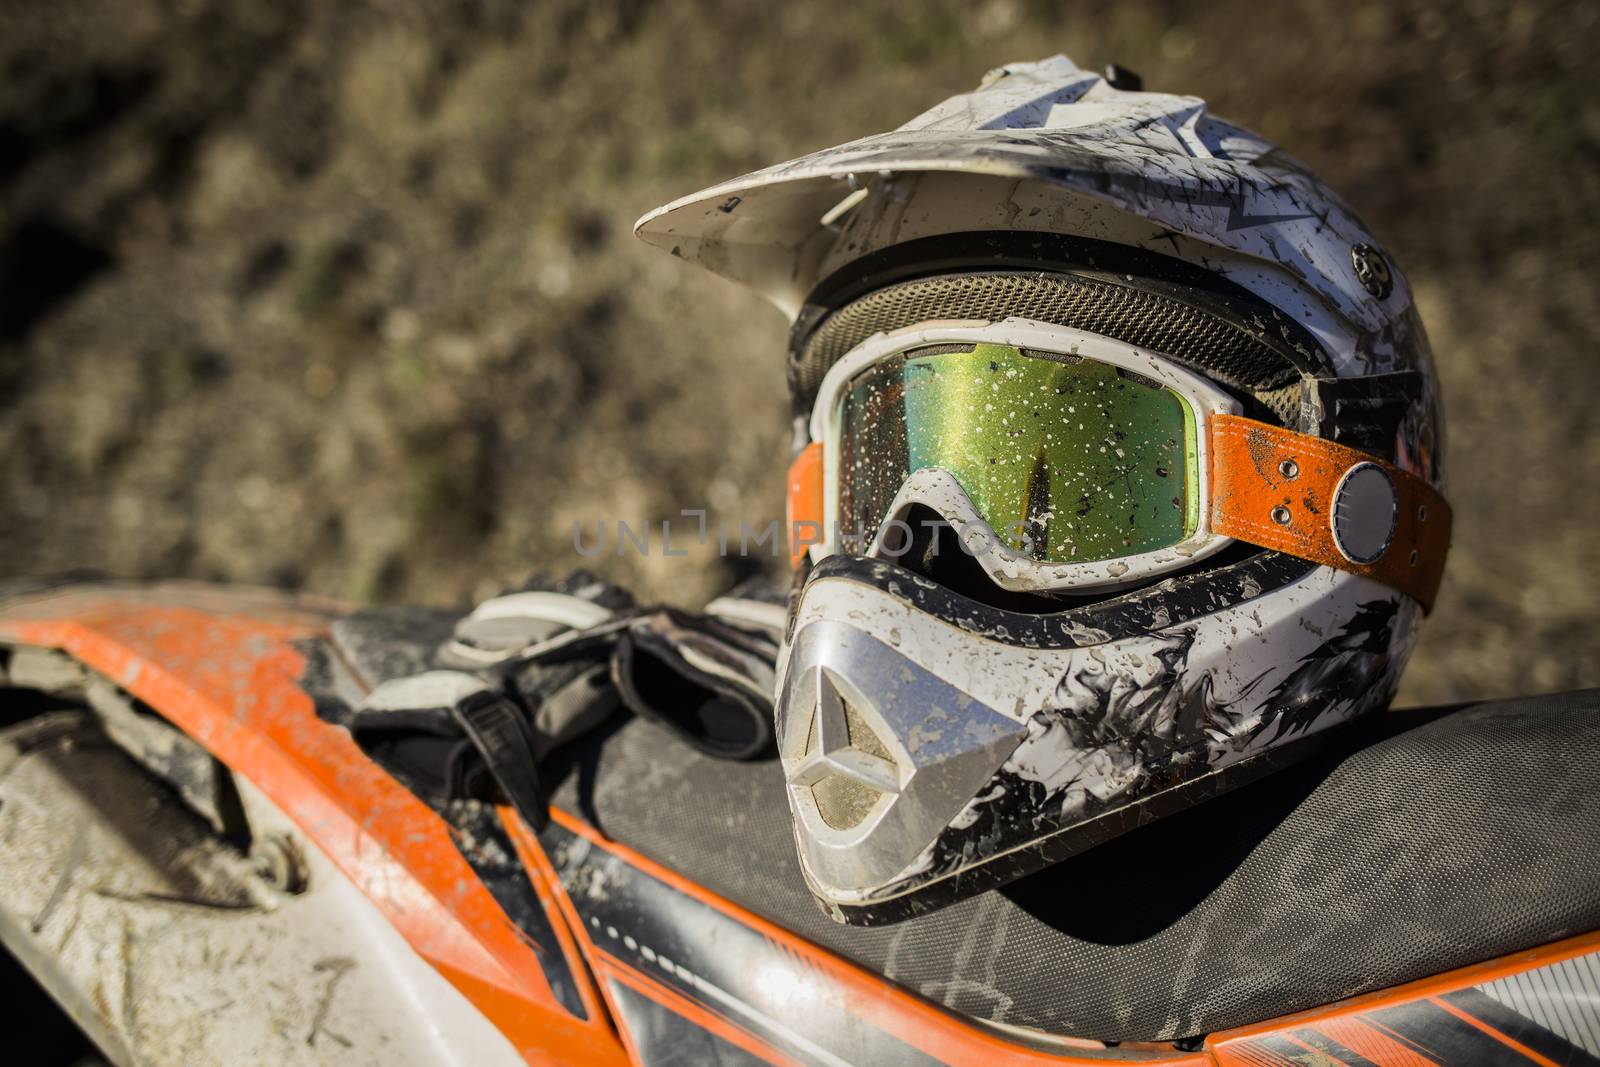 Dirty motorcycle motocross helmet with goggles by Kor